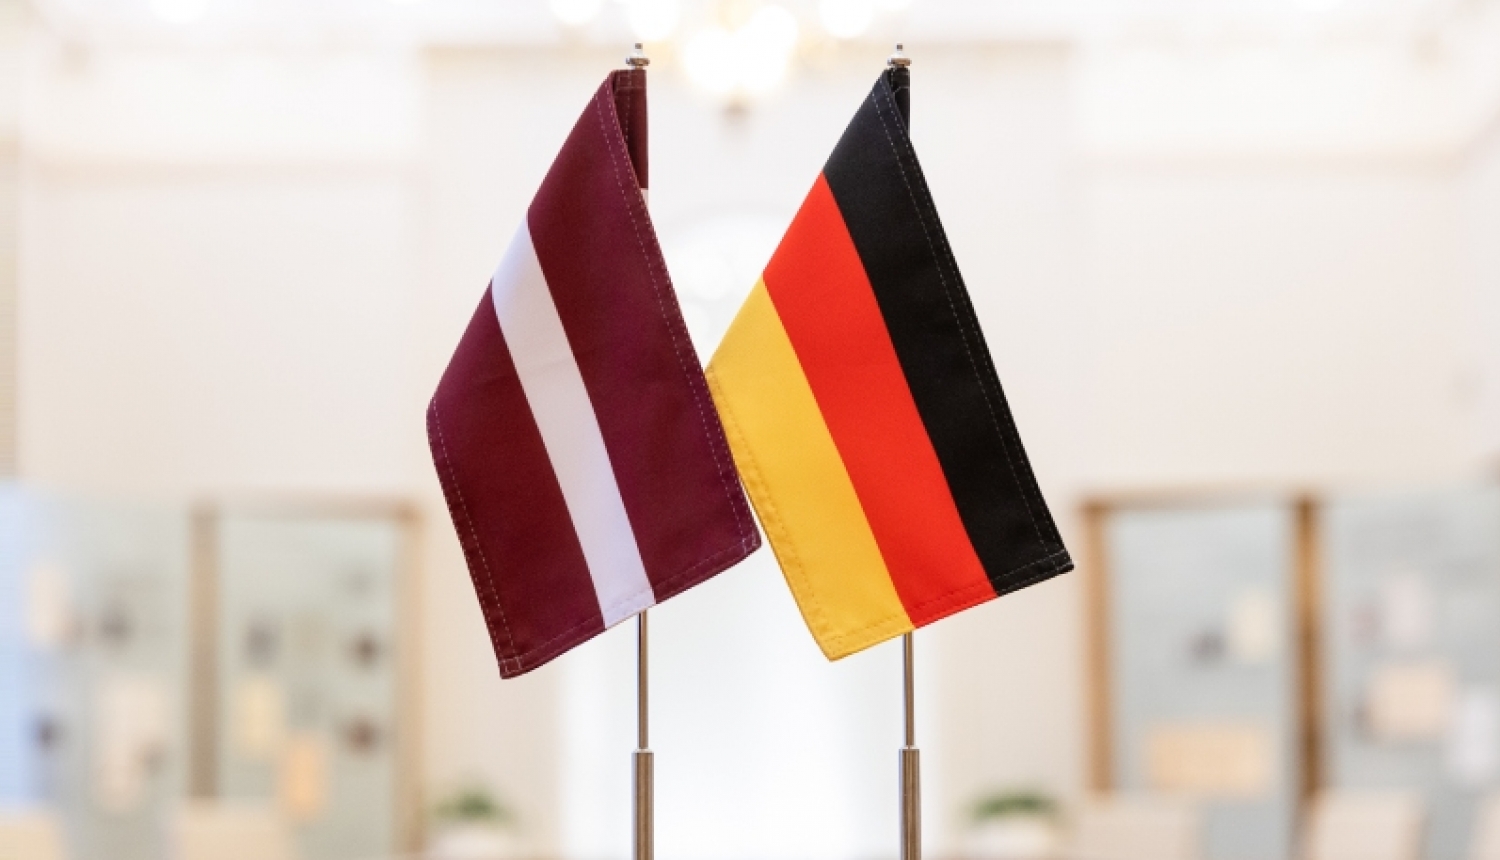 Flags of Latvia and Germany